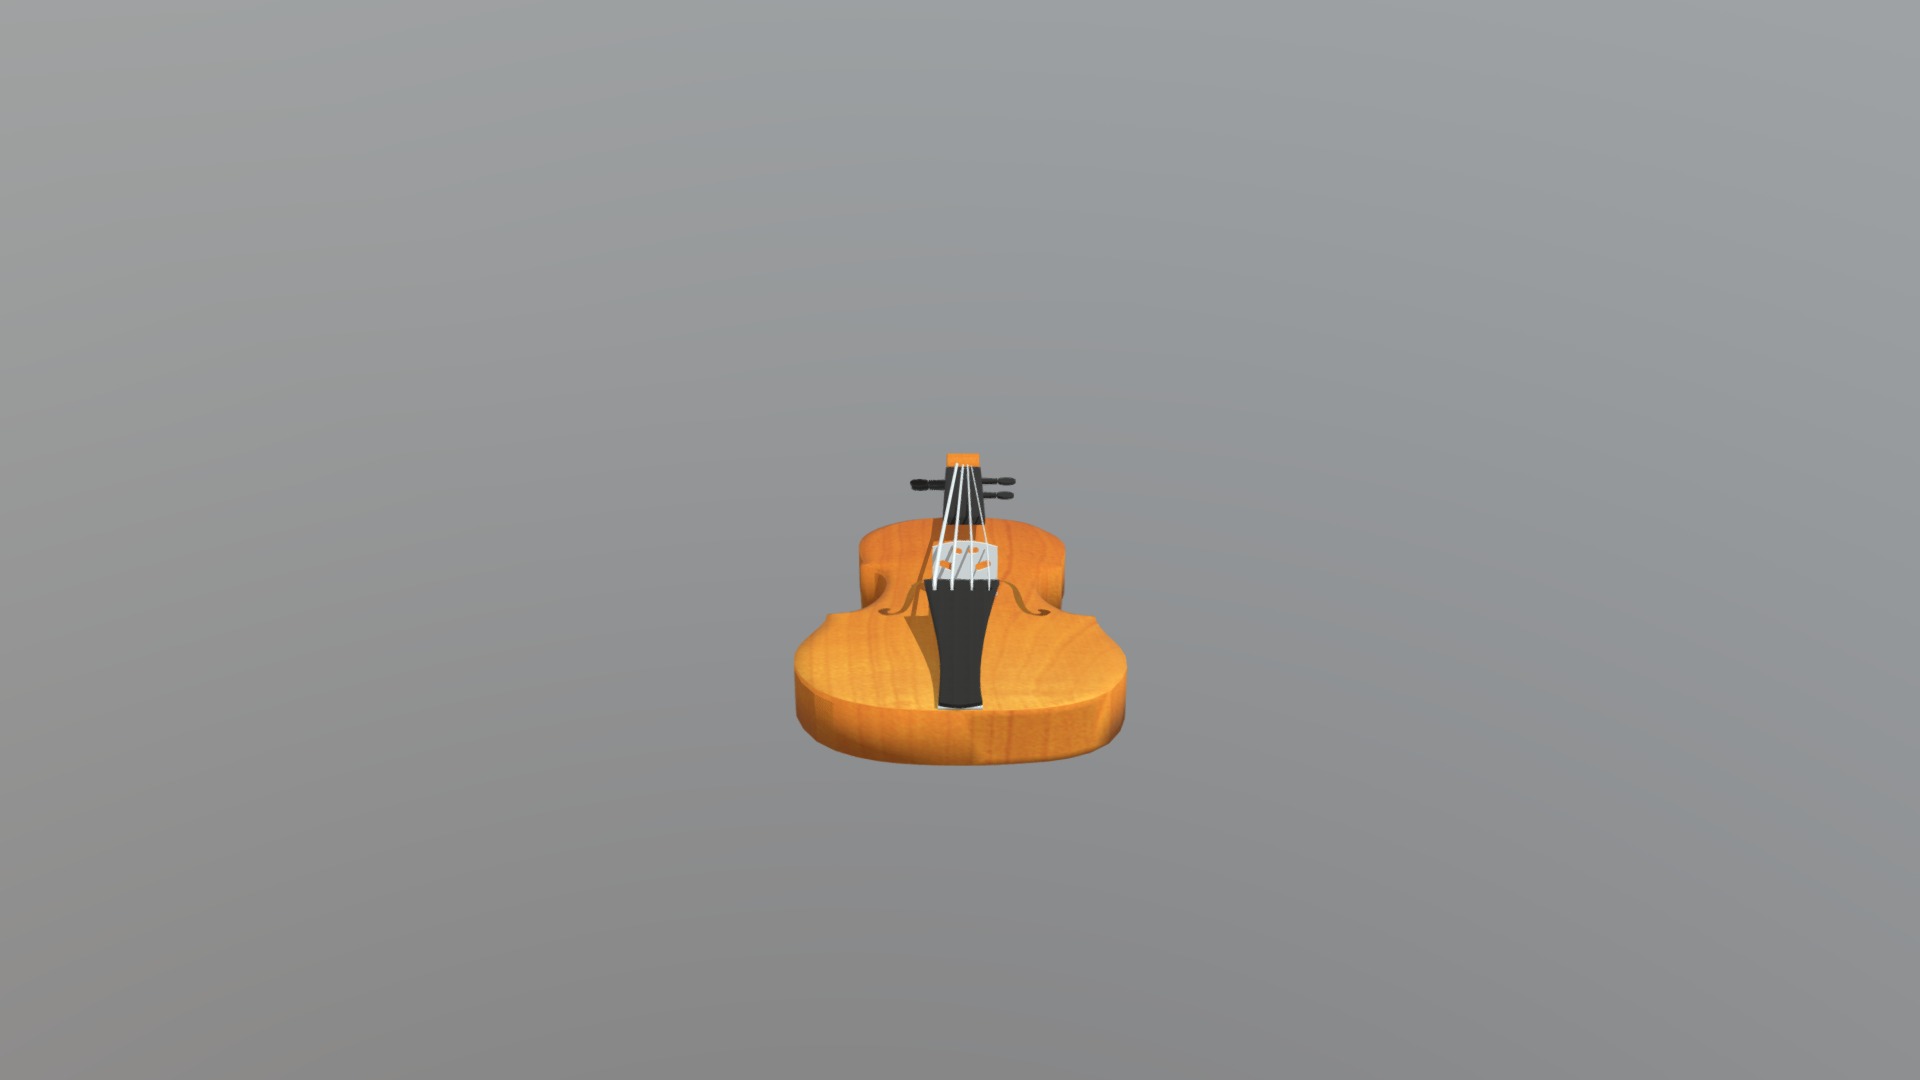 3D model Violin - This is a 3D model of the Violin. The 3D model is about a small orange and black toy.